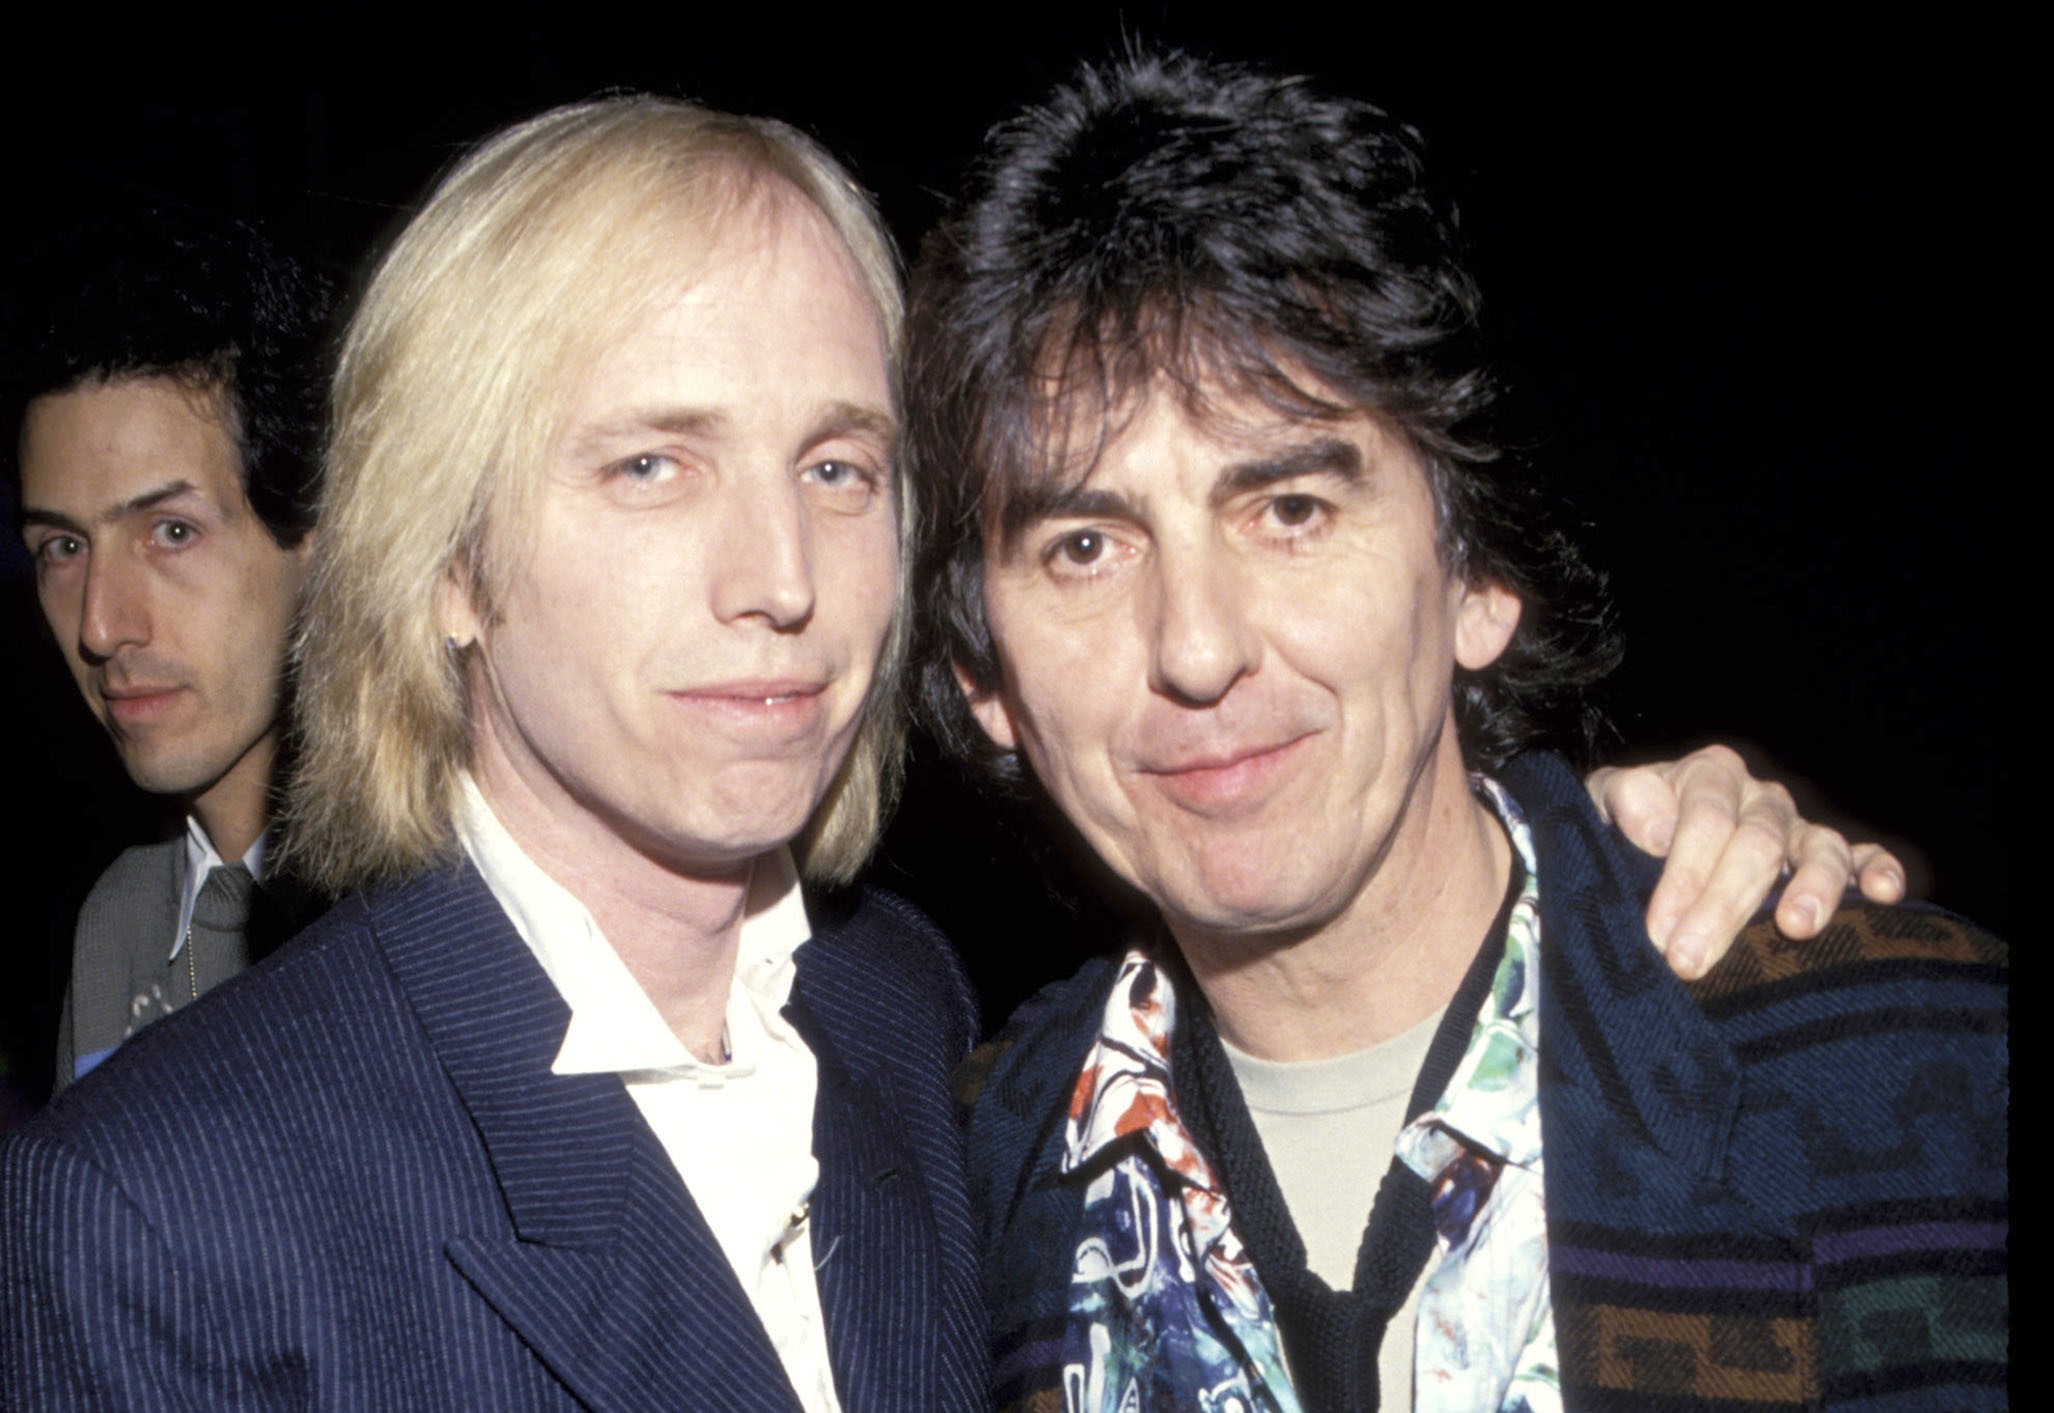 Tom Petty stands with his hand on George Harrison's shoulder.